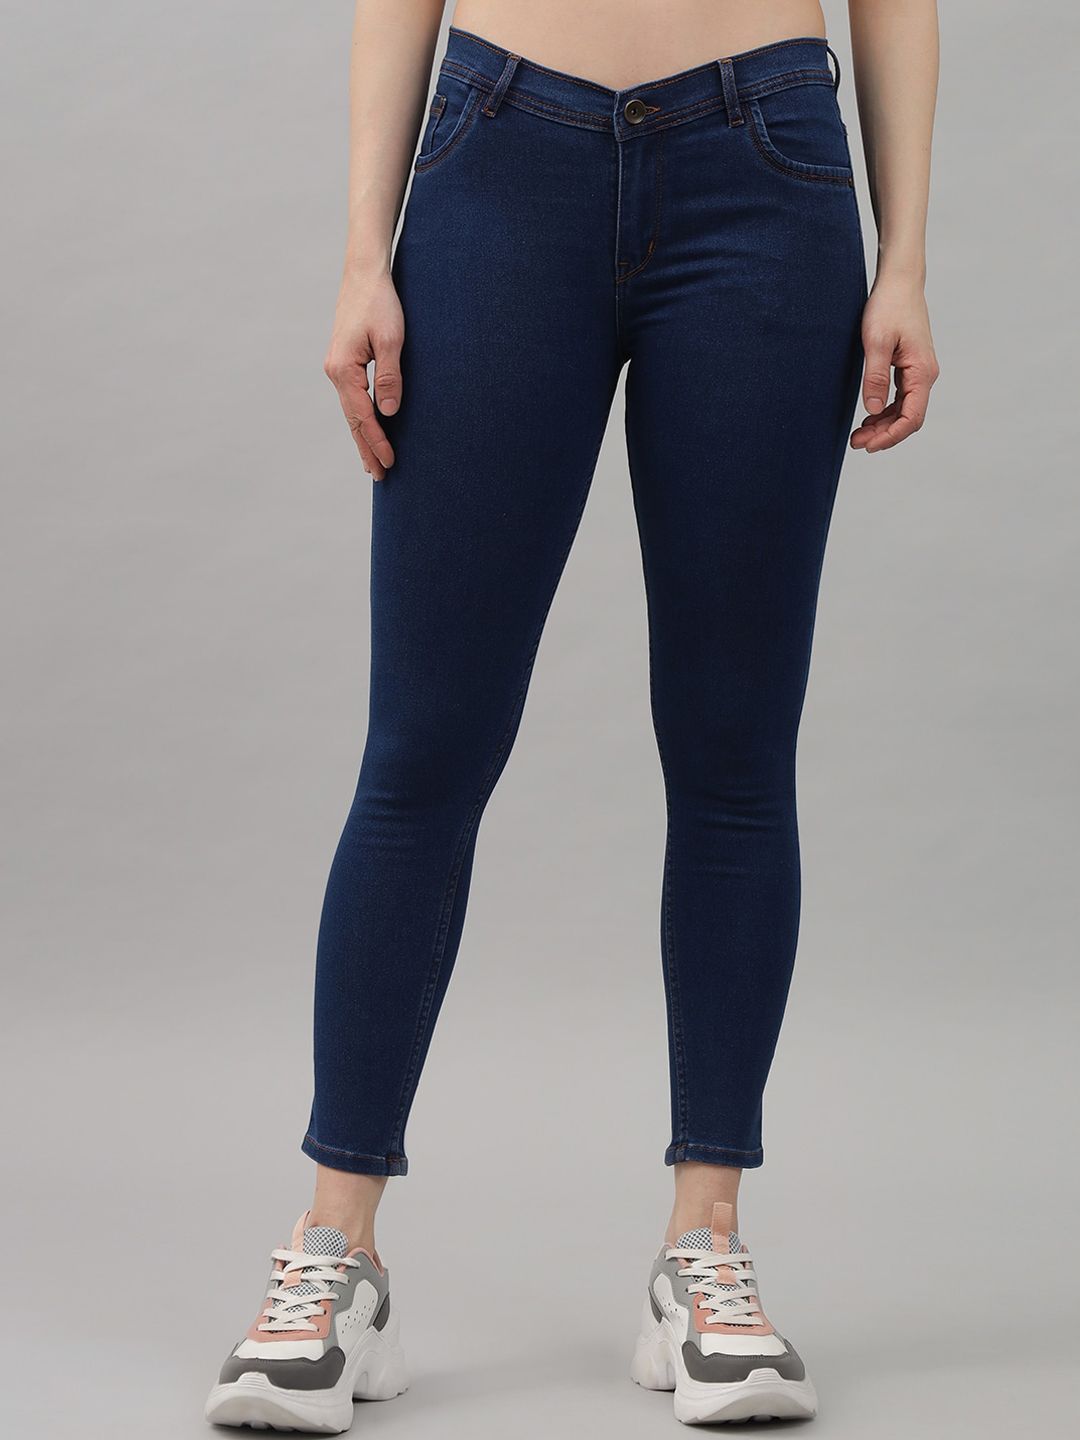 Q-rious Women Blue Slim Fit Stretchable Jeans Price in India